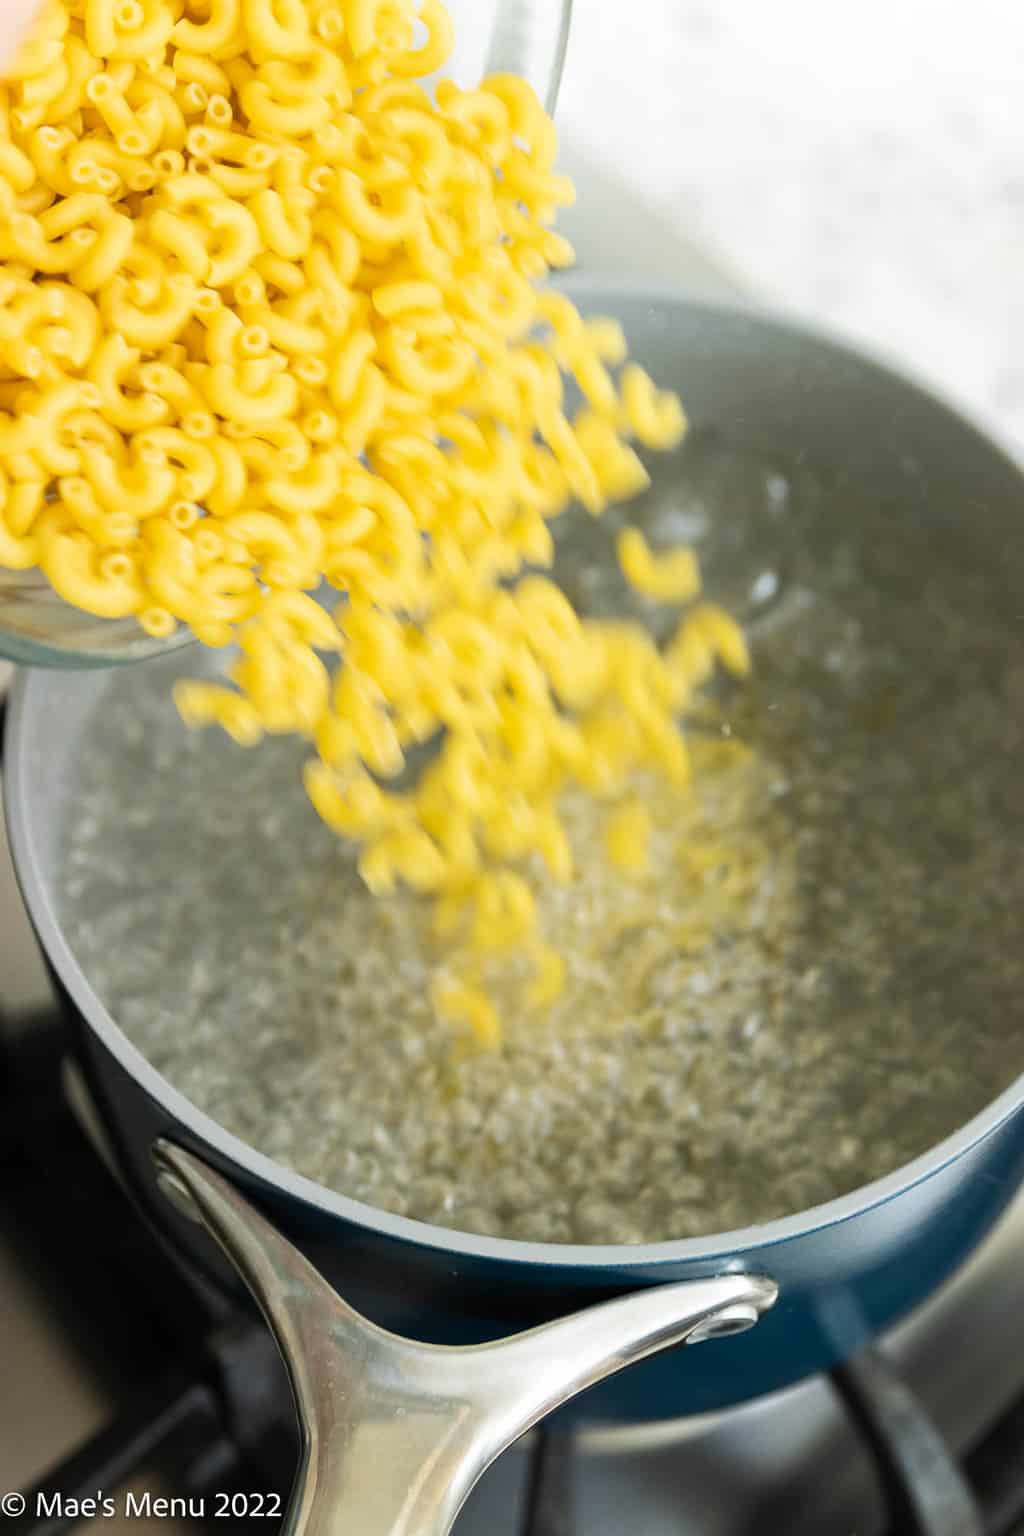 Pouring macaroni into a pot of boiling water.